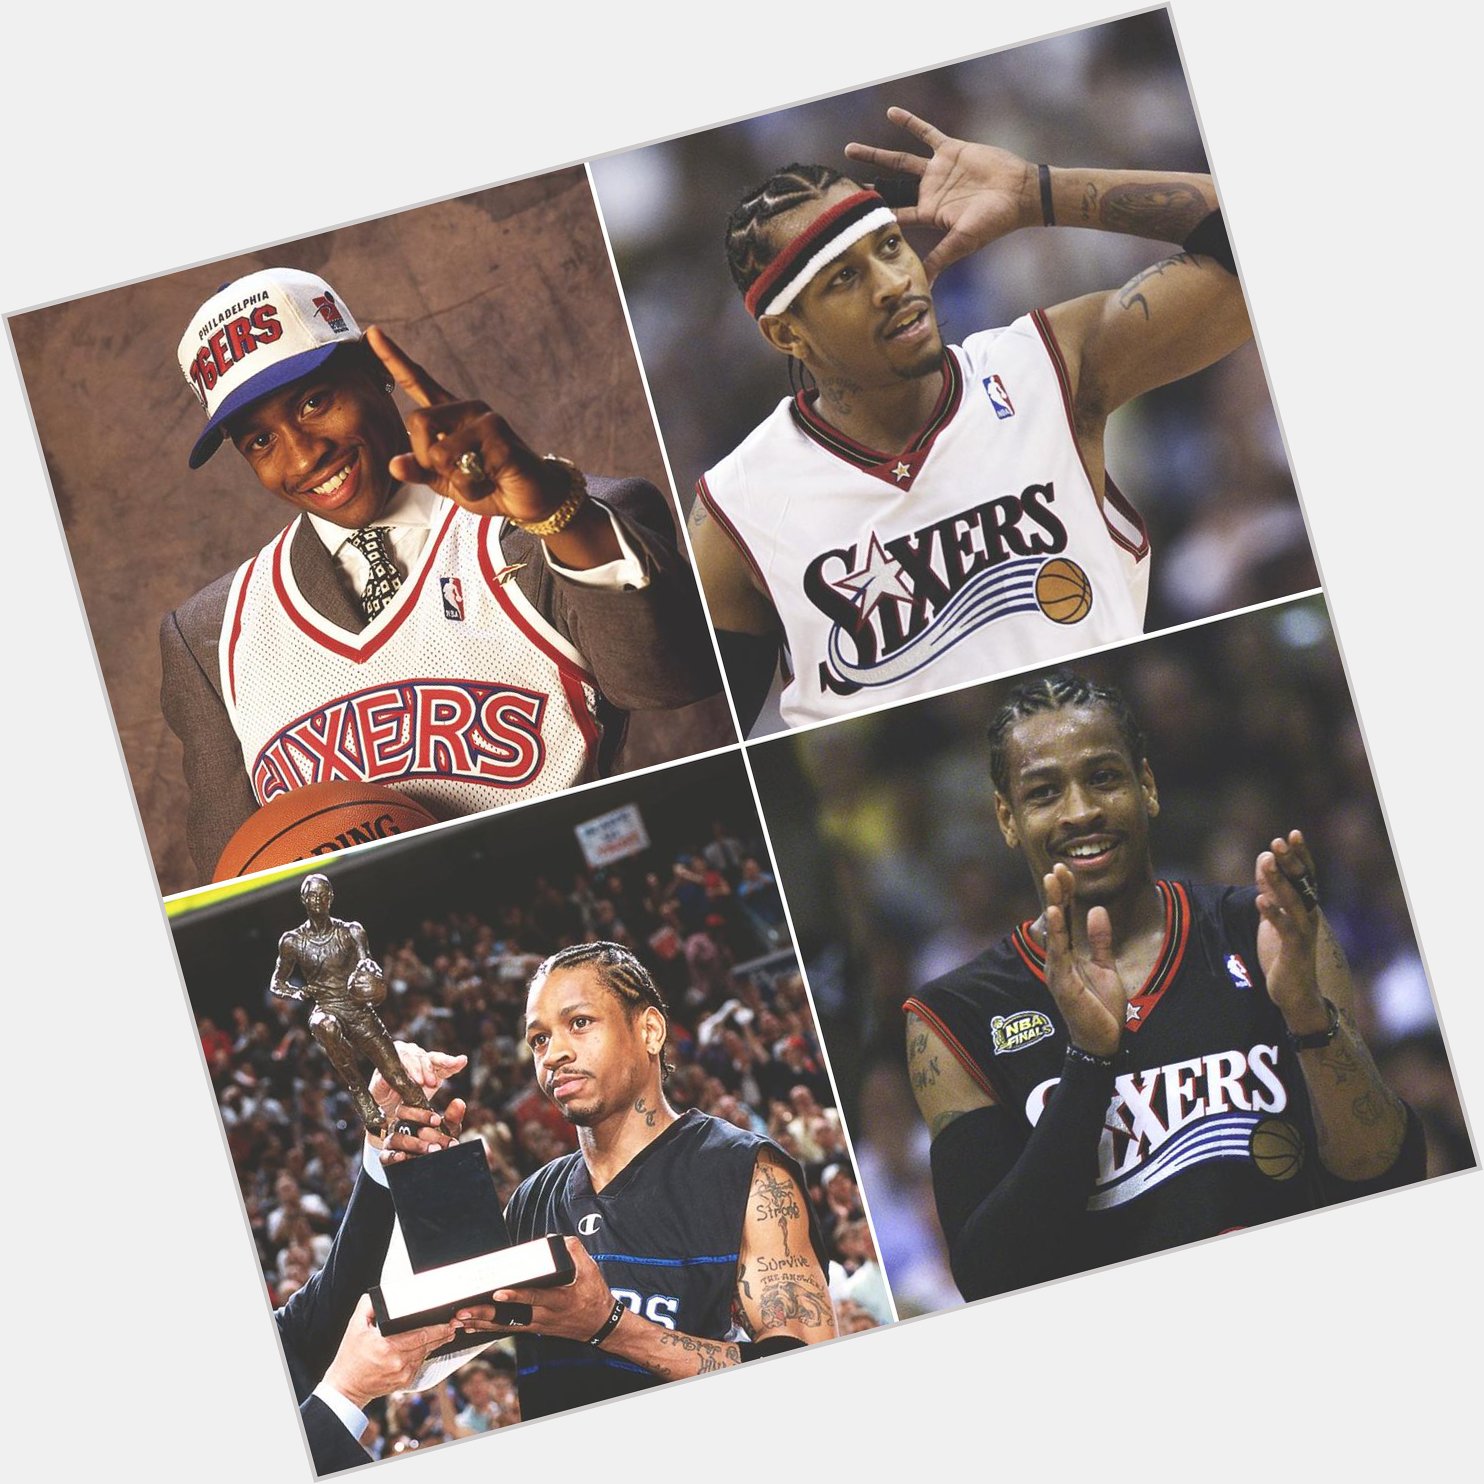 Happy Birthday to my baby!!   The icon. The legend. The Answer.

Allen Iverson turns 44 today 